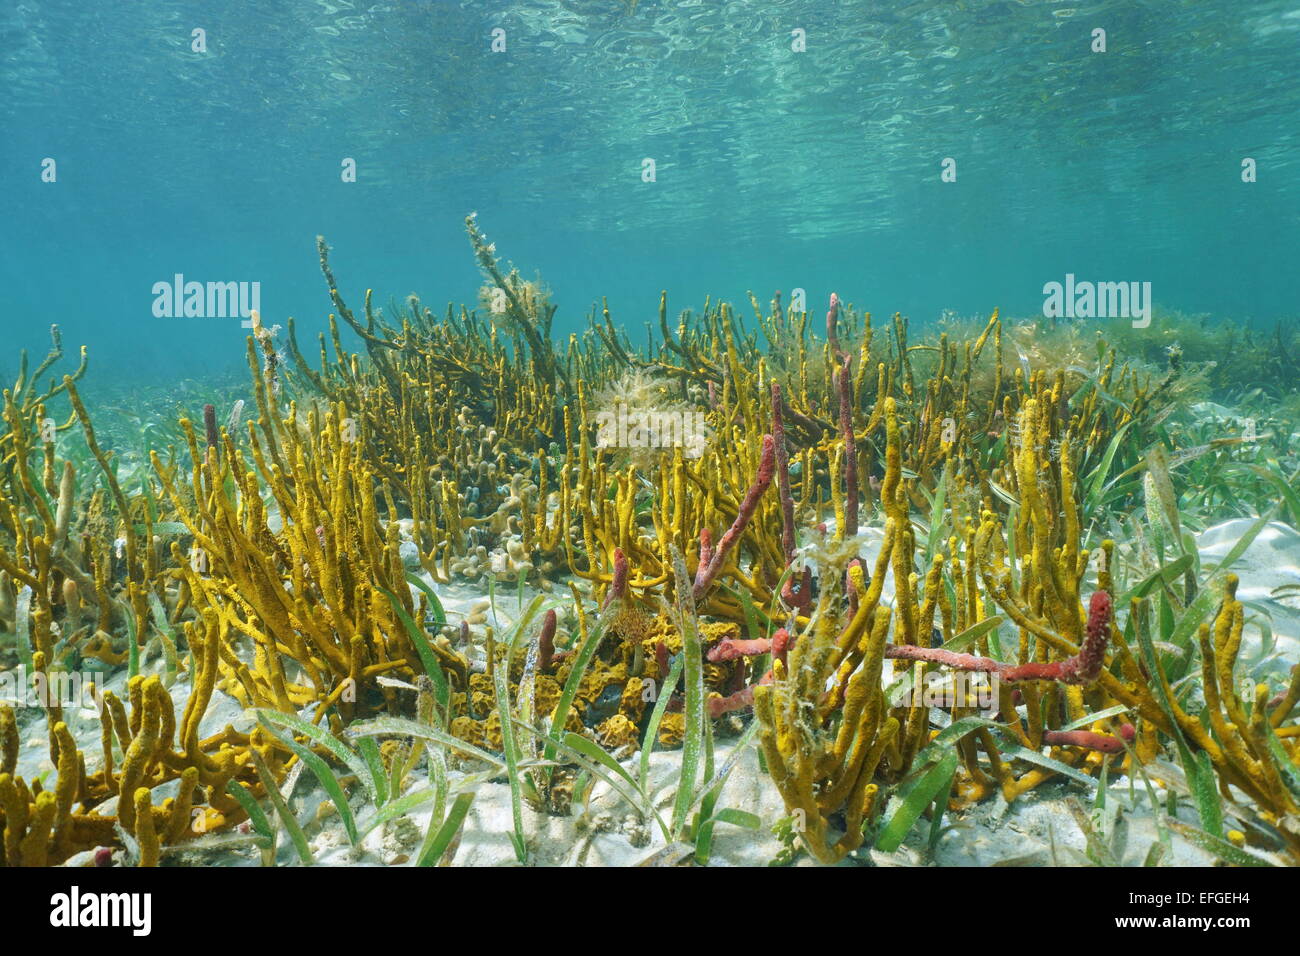 Colorful seabed in shallow water with rope sponges, Caribbean sea, Panama Stock Photo